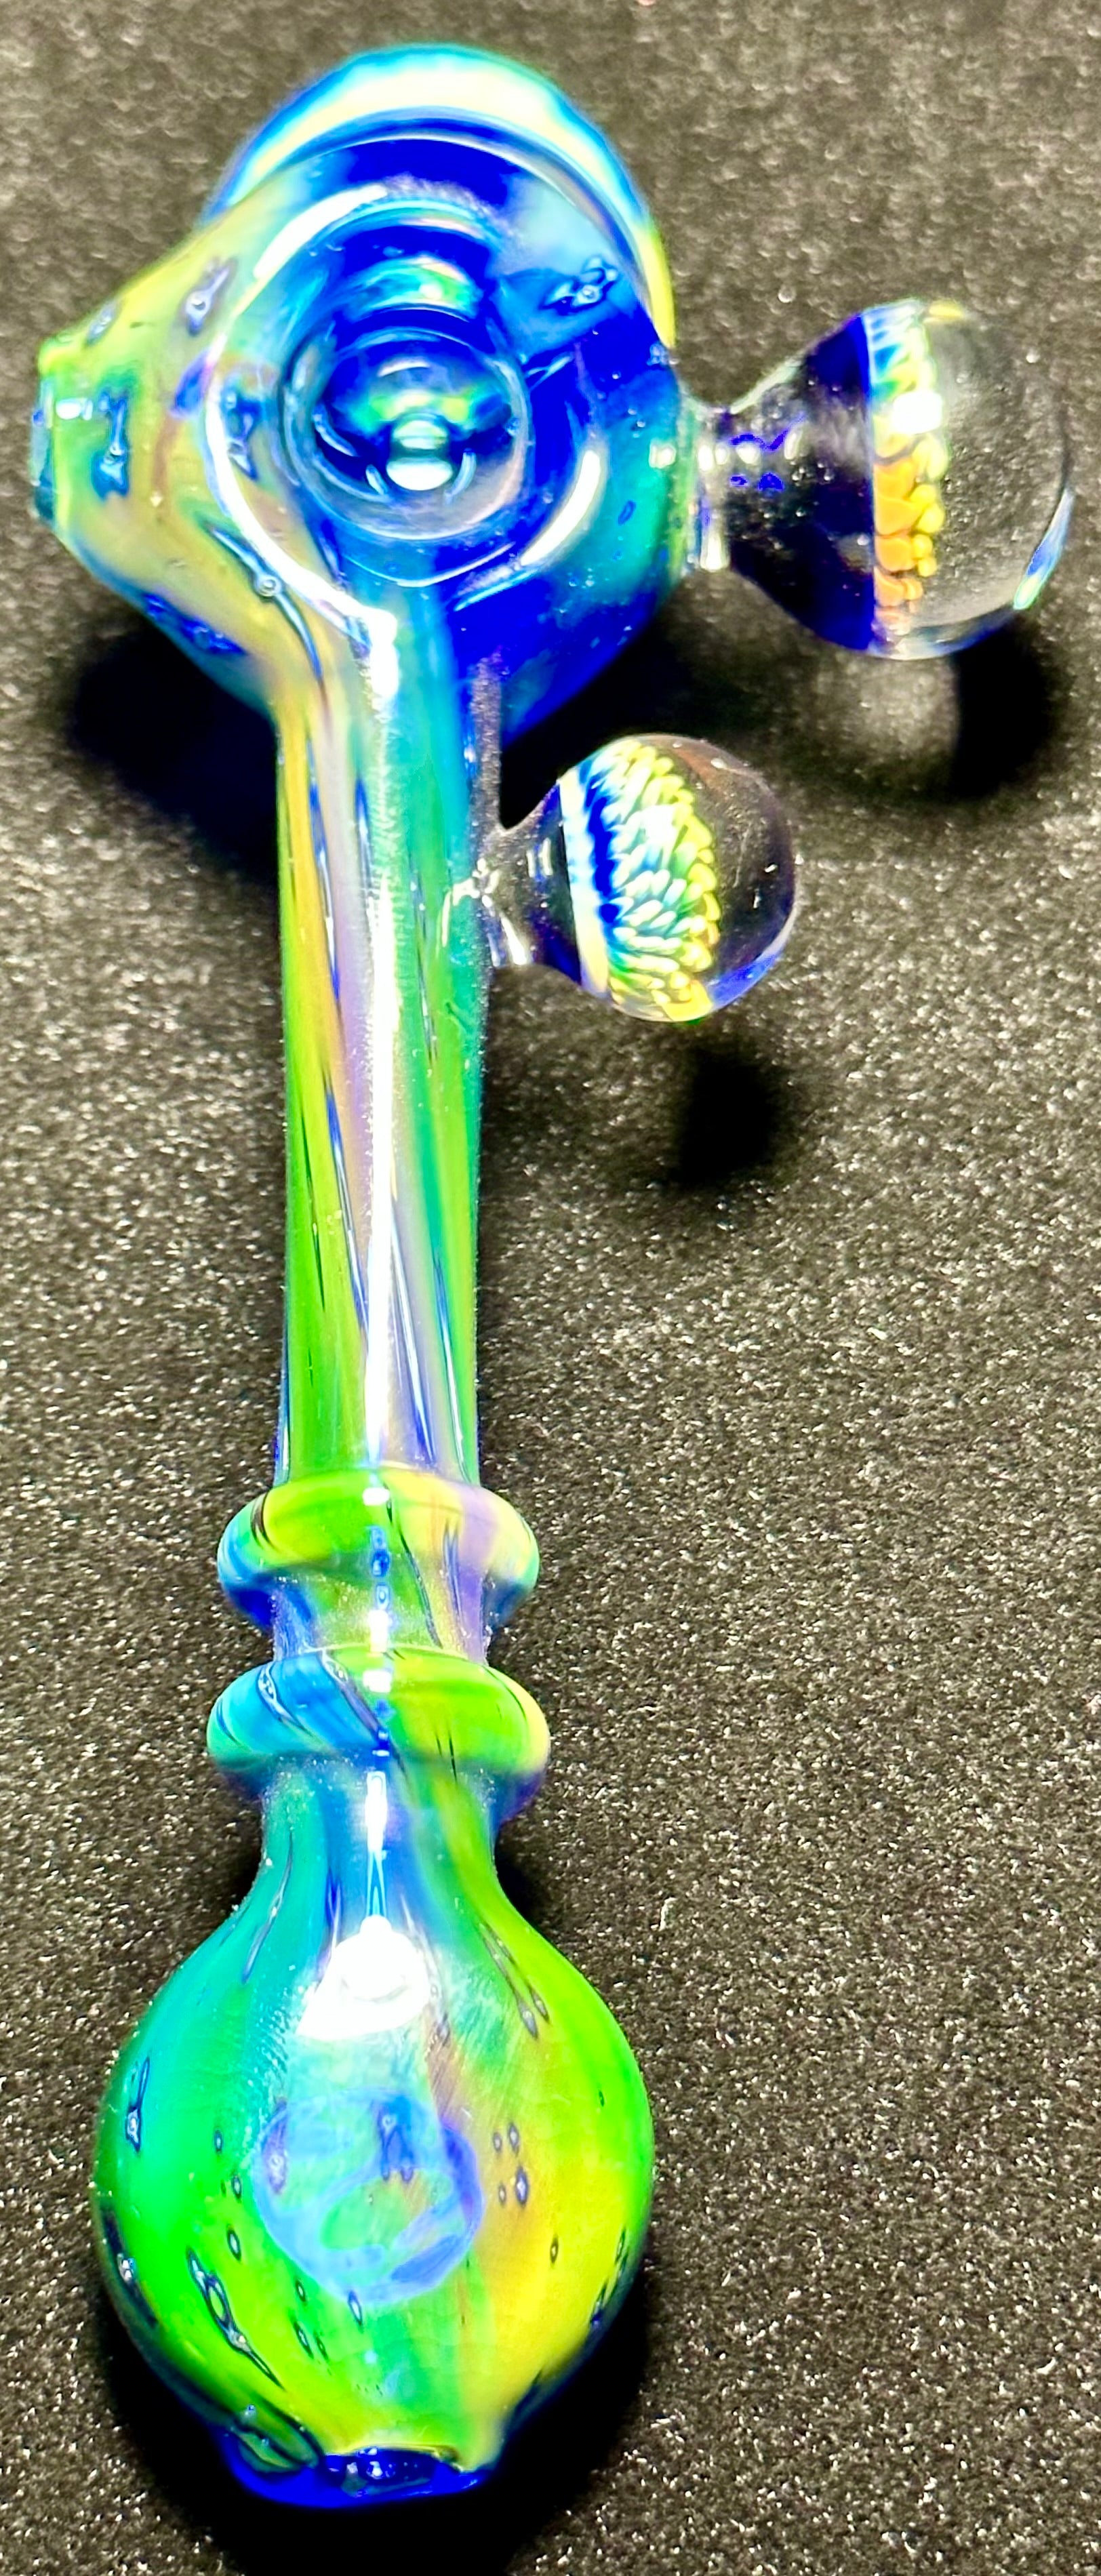 Fearn Gully Bubbletrap Fumed Honeycomb Hammer Double Implosion Mibs